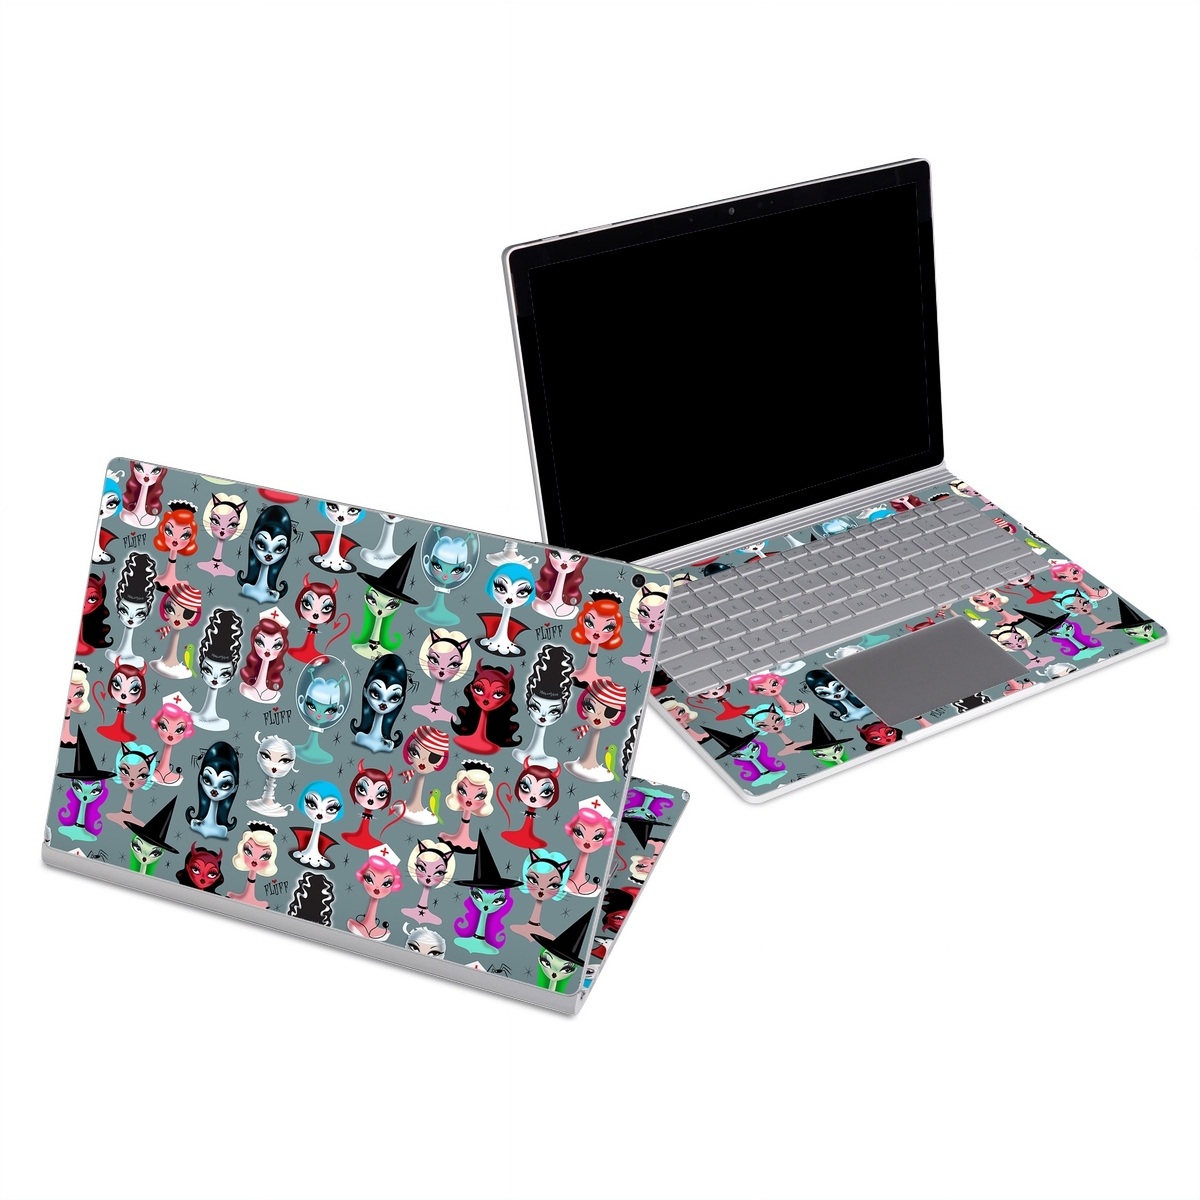 Microsoft Surface Book Series Skin design of Facial expression, Head, Design, Collection, Fictional character, Pattern, Skull, Illustration, Collage, Style, with gray, white, red, blue, green, black, pink, purple colors